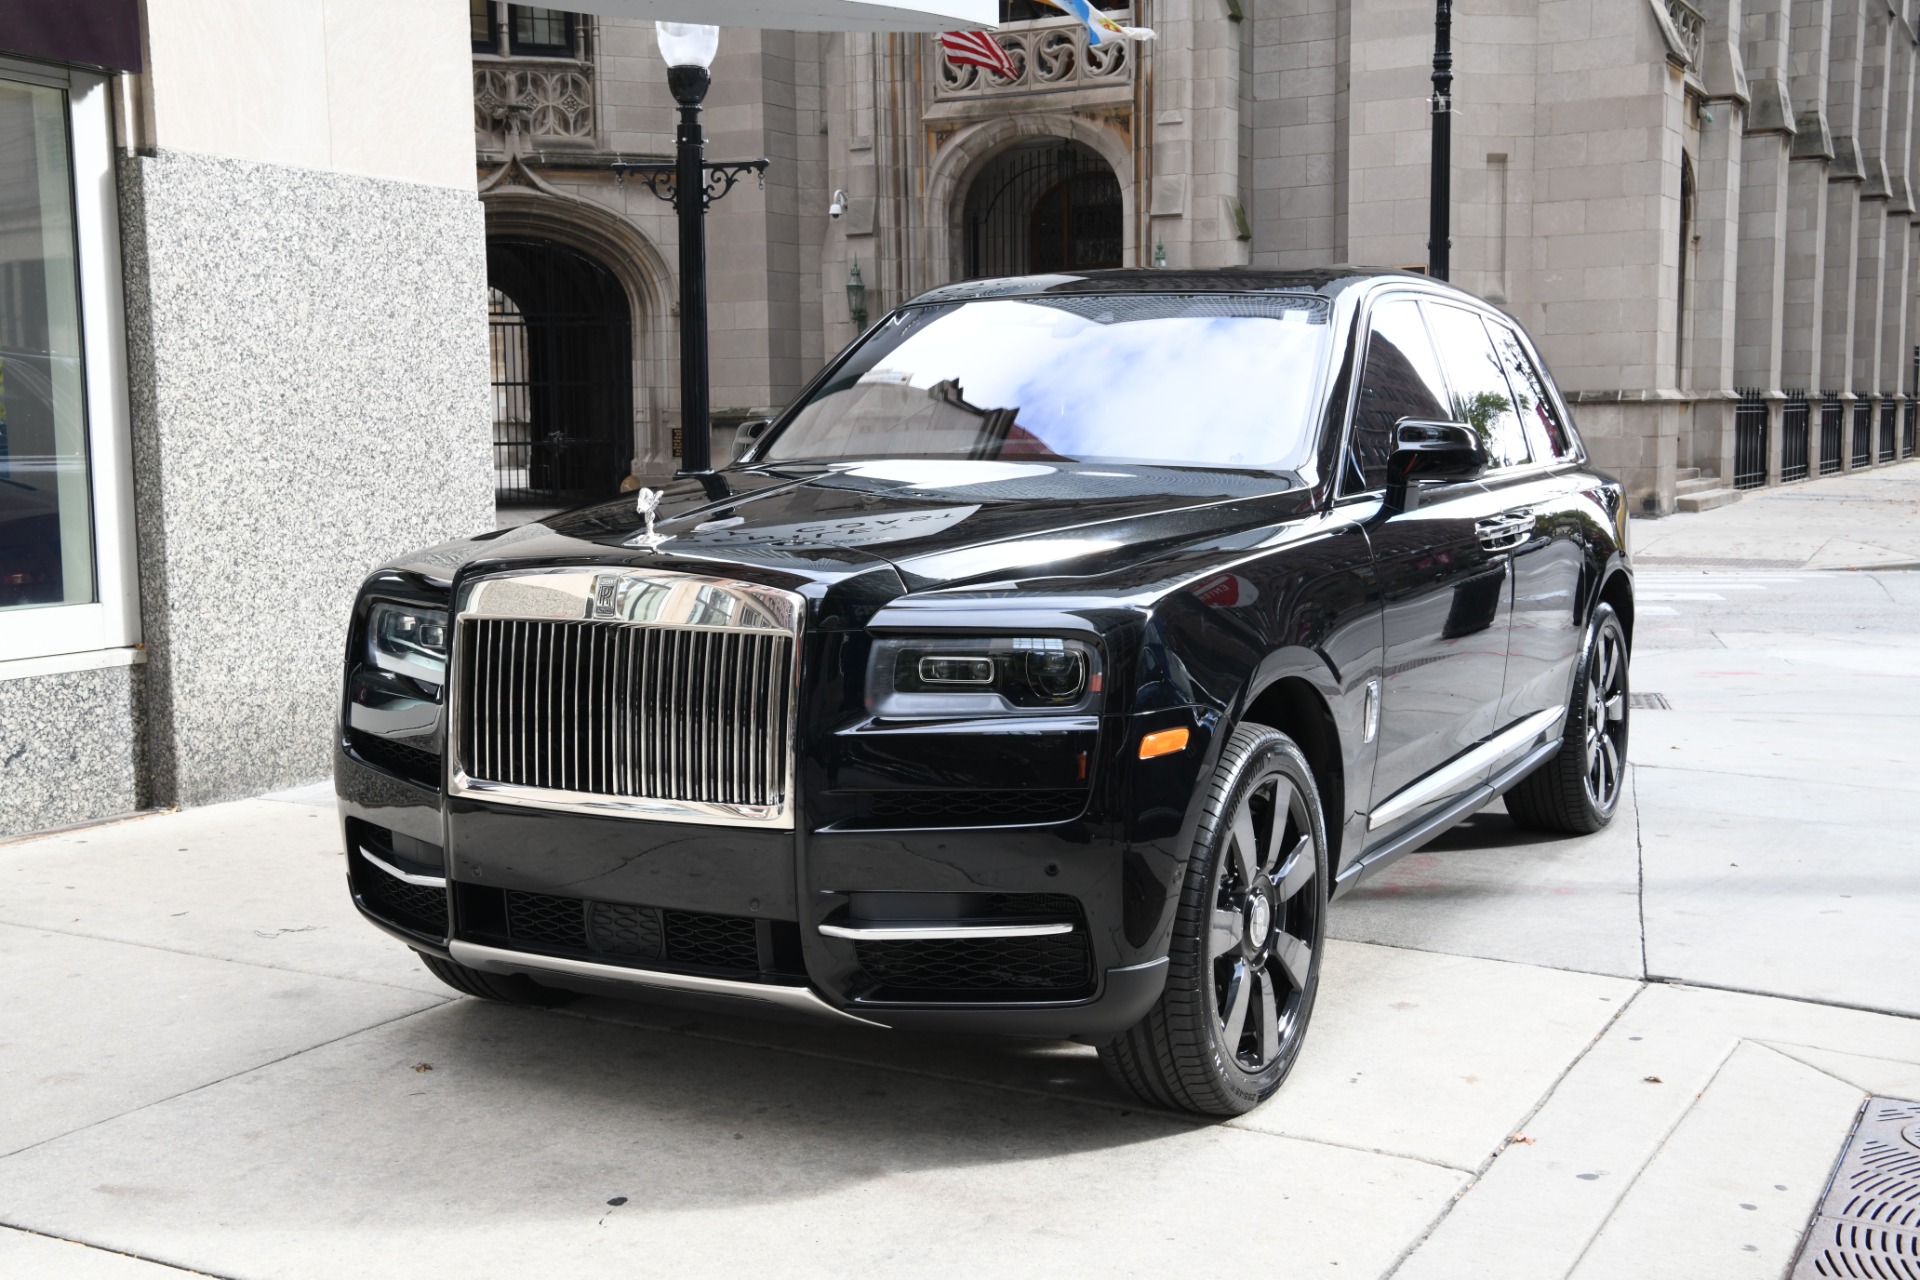 Moscow Russia  13 03 2020 Rolls Royce Cullinan is Moving Down the  Street the Driver is Carrying a Businessman Editorial Stock Photo  Image  of scenery rolls 178152853